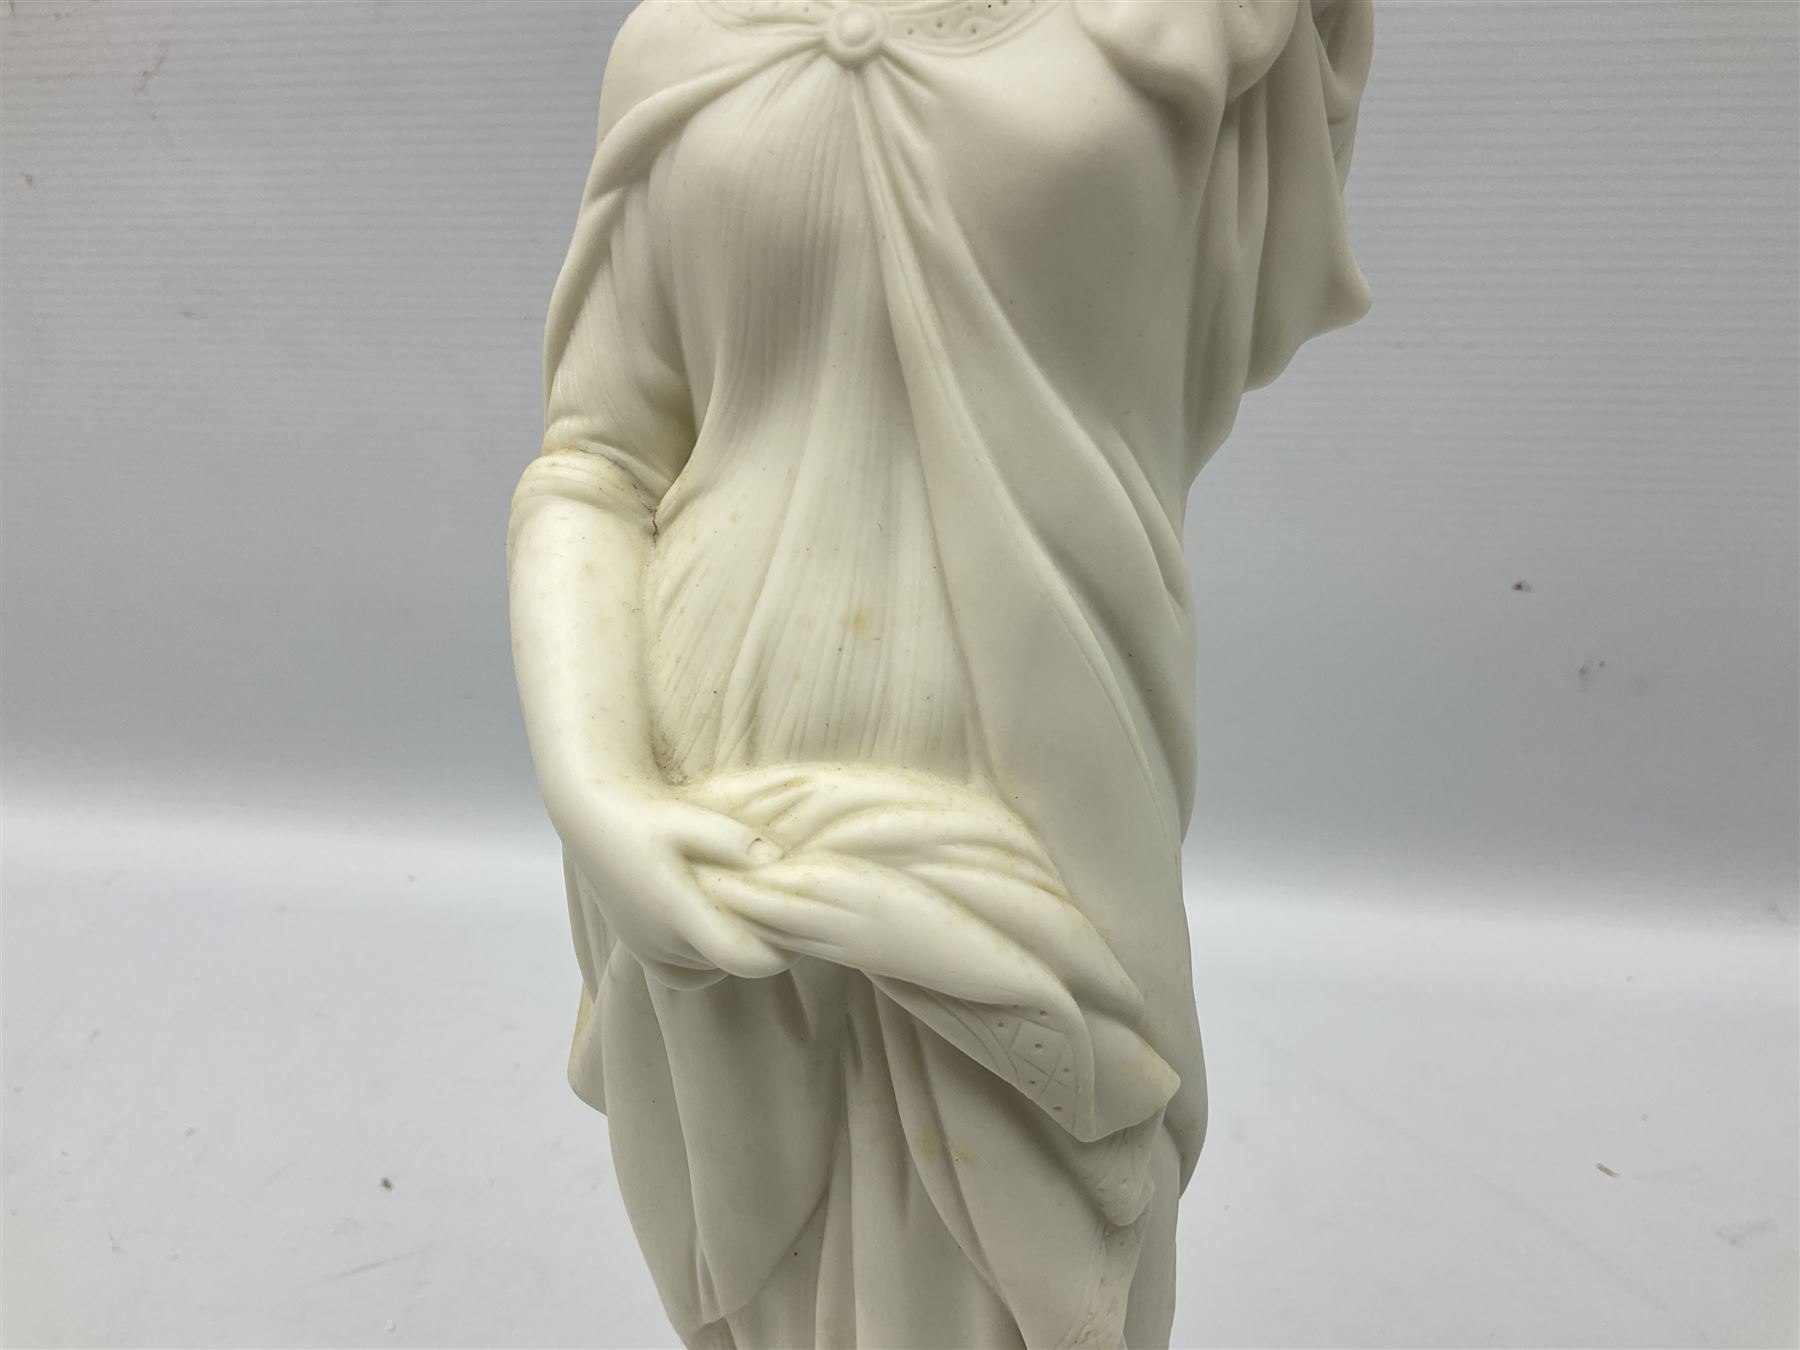 Parian ware figure of a woman in classical dress with one hand raised - Image 3 of 8